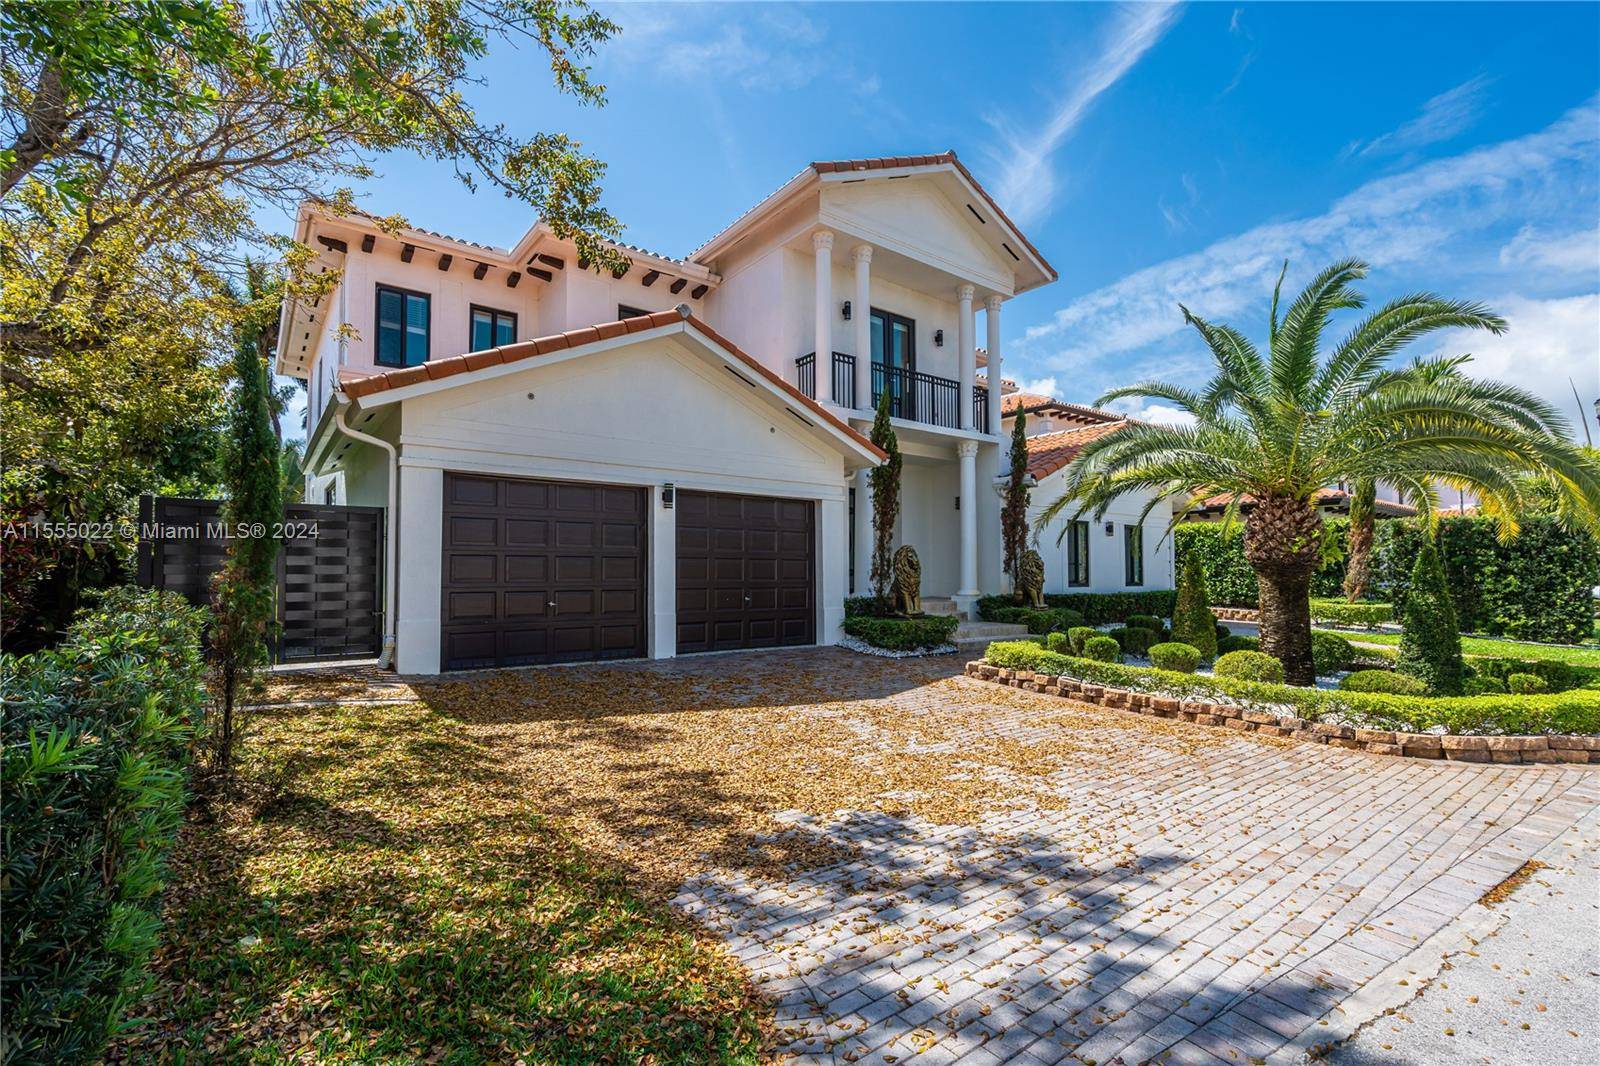 Experience luxurious contemporary living in this fully updated Cutler Cay masterpiece !